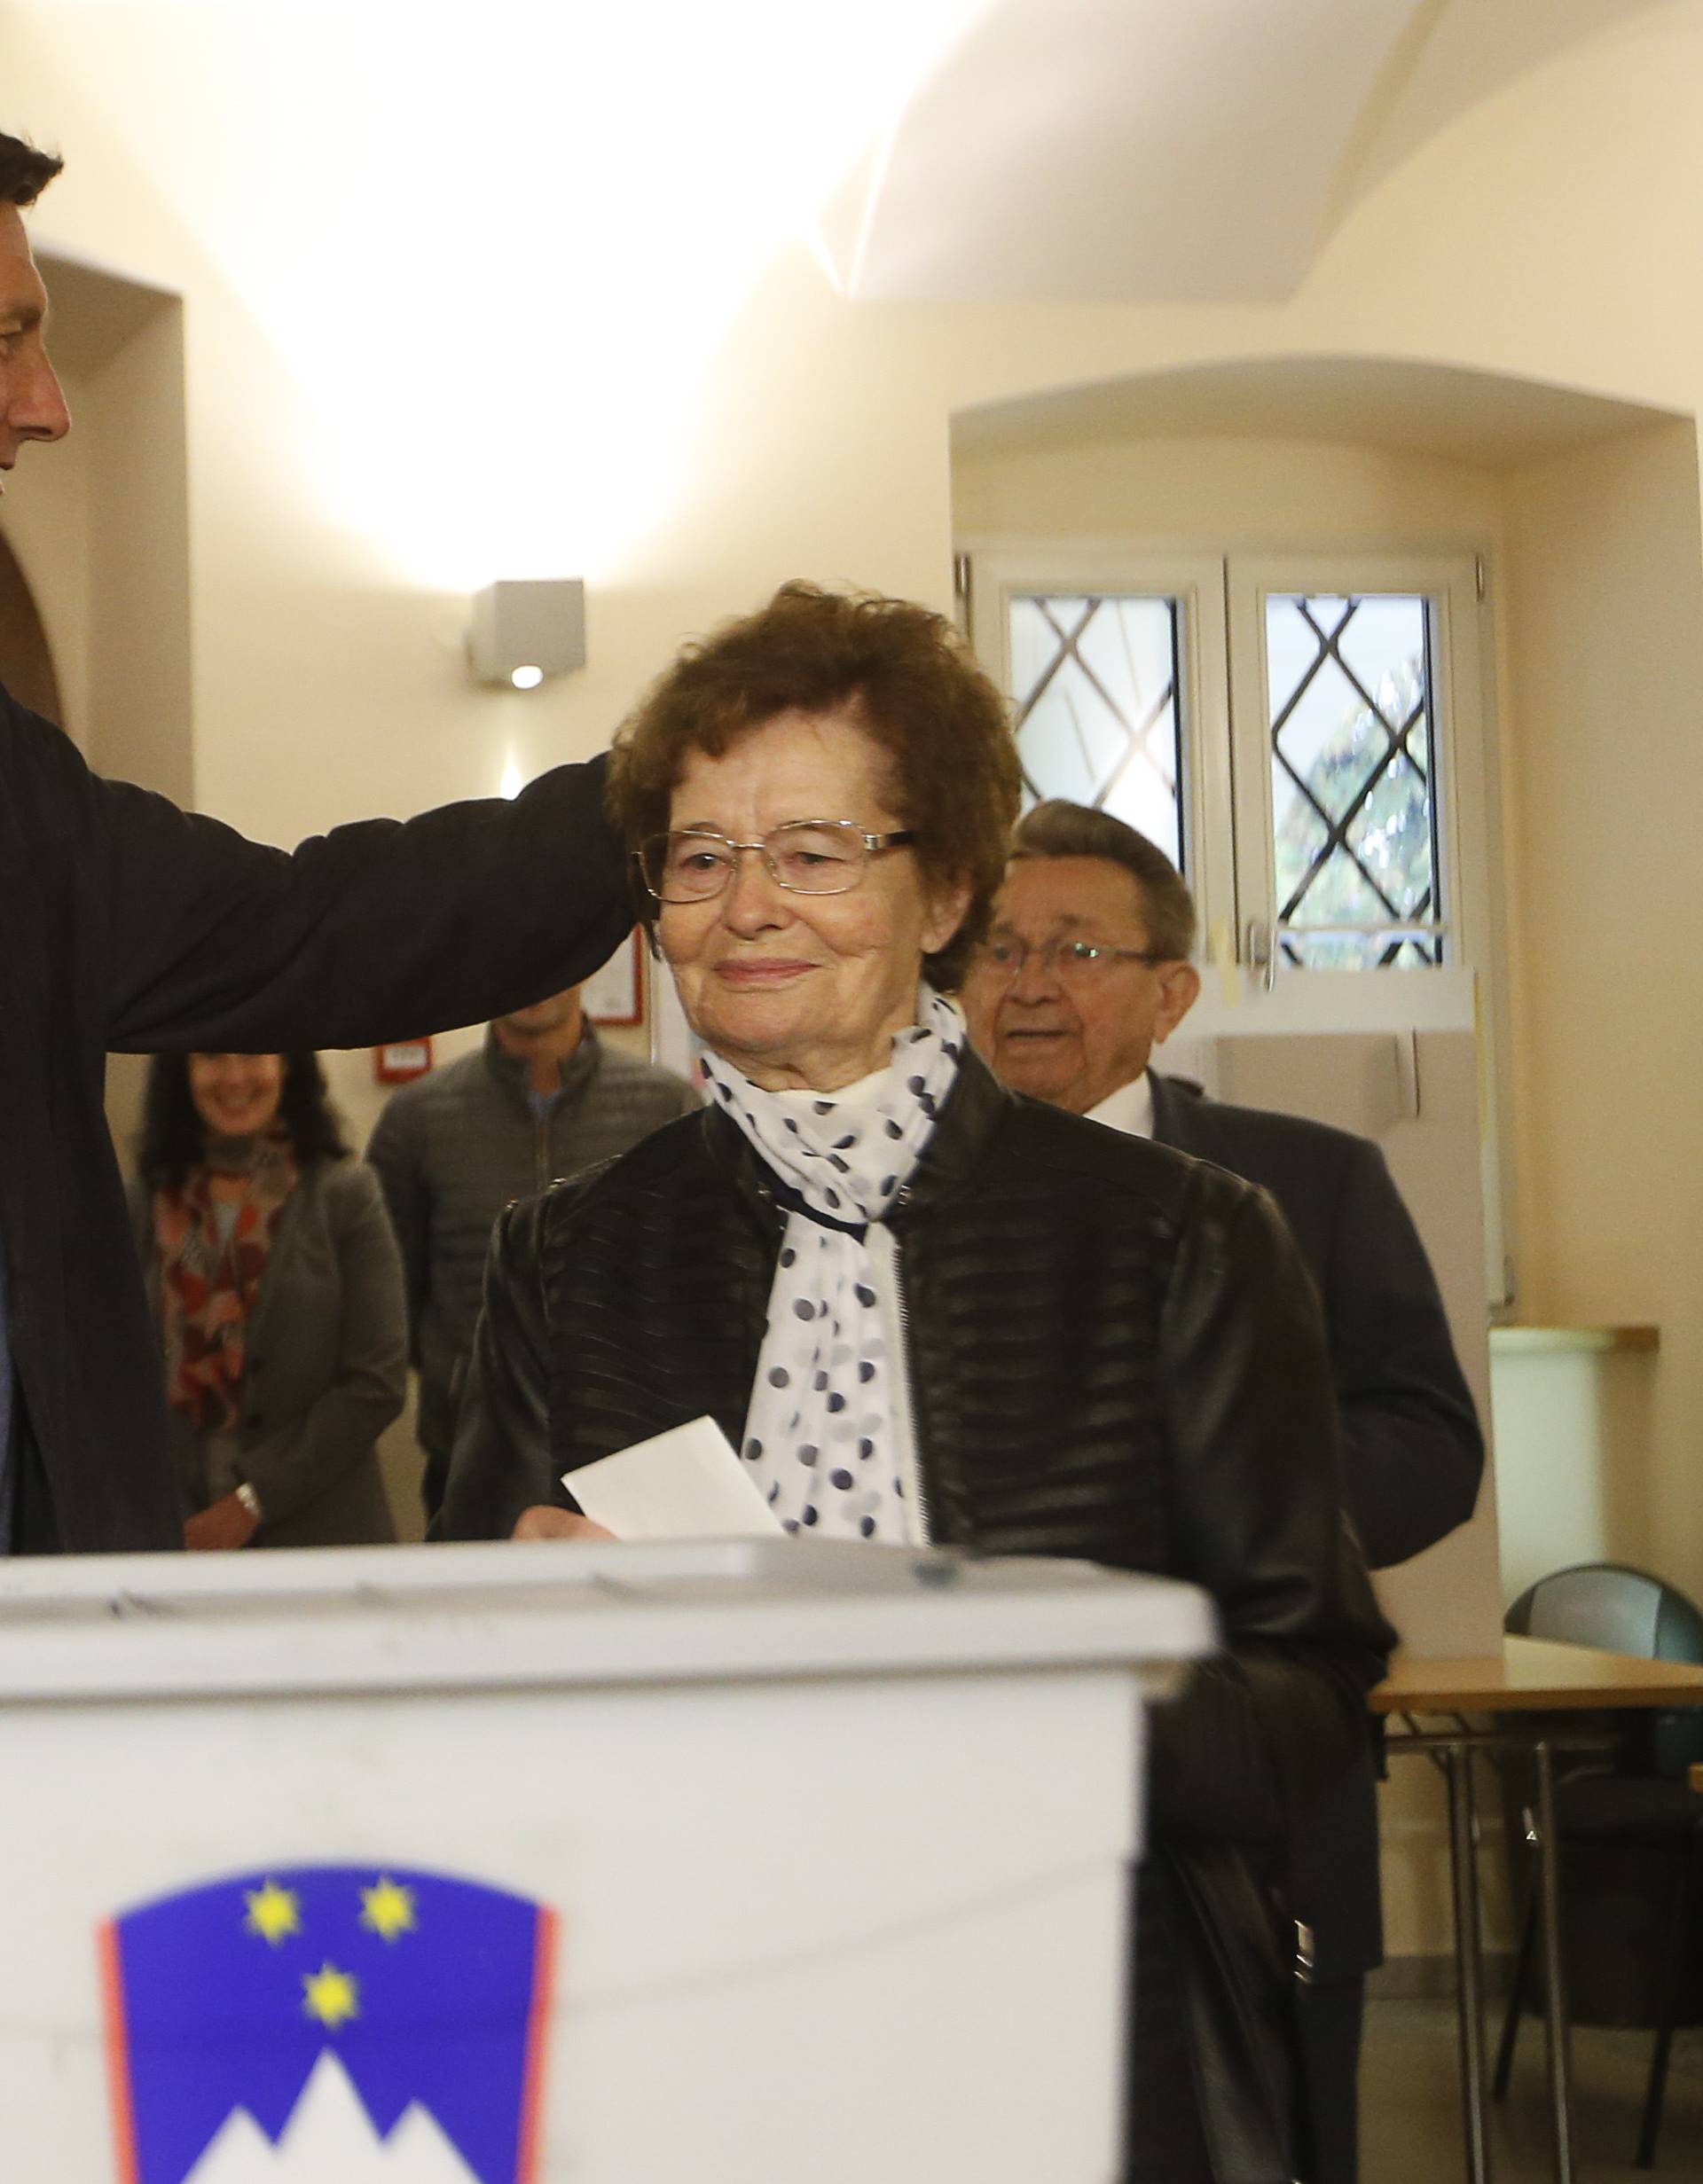 Presidential candidate Borut Pahor and his mother Ivica Martelanc cast their votes at a polling station during the presidential election in Sempeter pri Novi Gorici